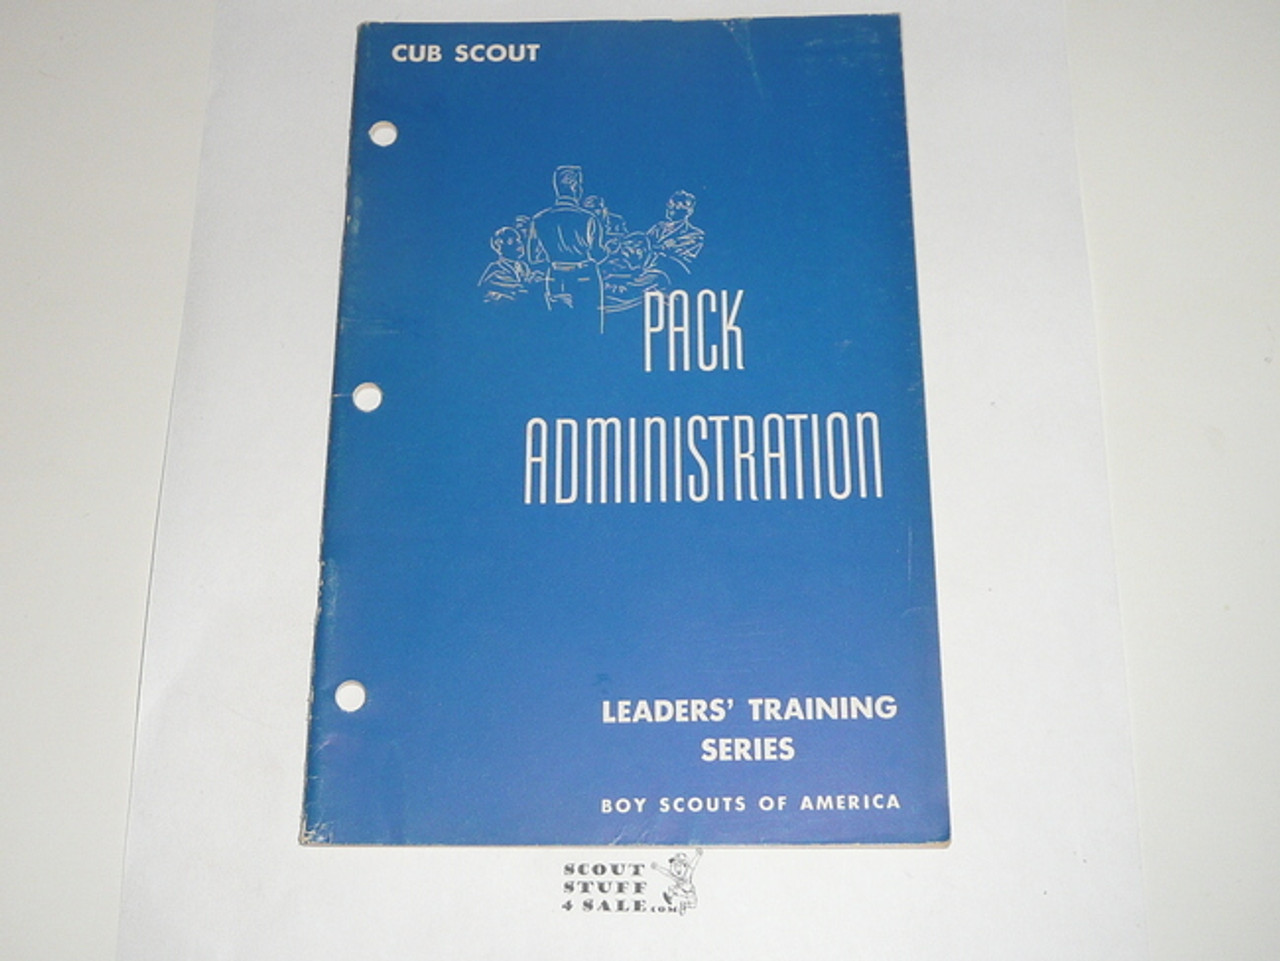 Cub Scout Leaders' Training Series, Pack Administration, 10-56 printing